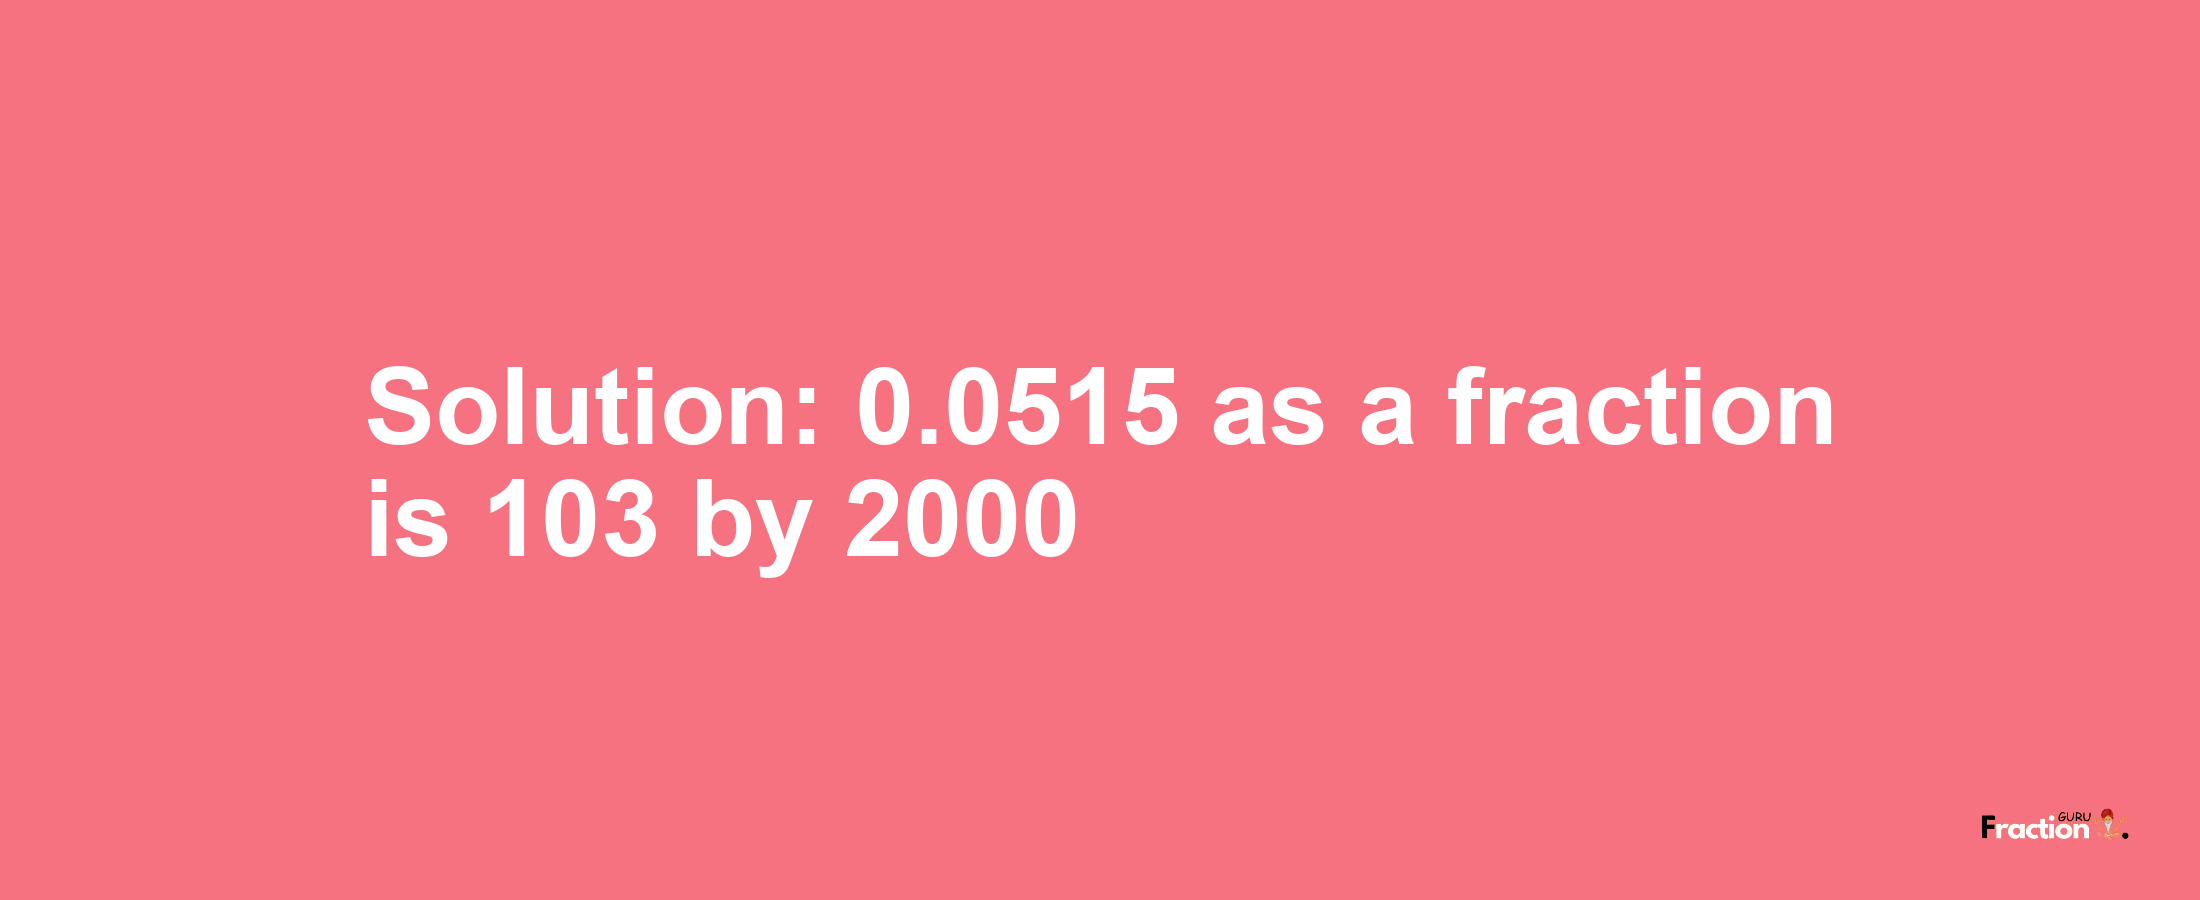 Solution:0.0515 as a fraction is 103/2000